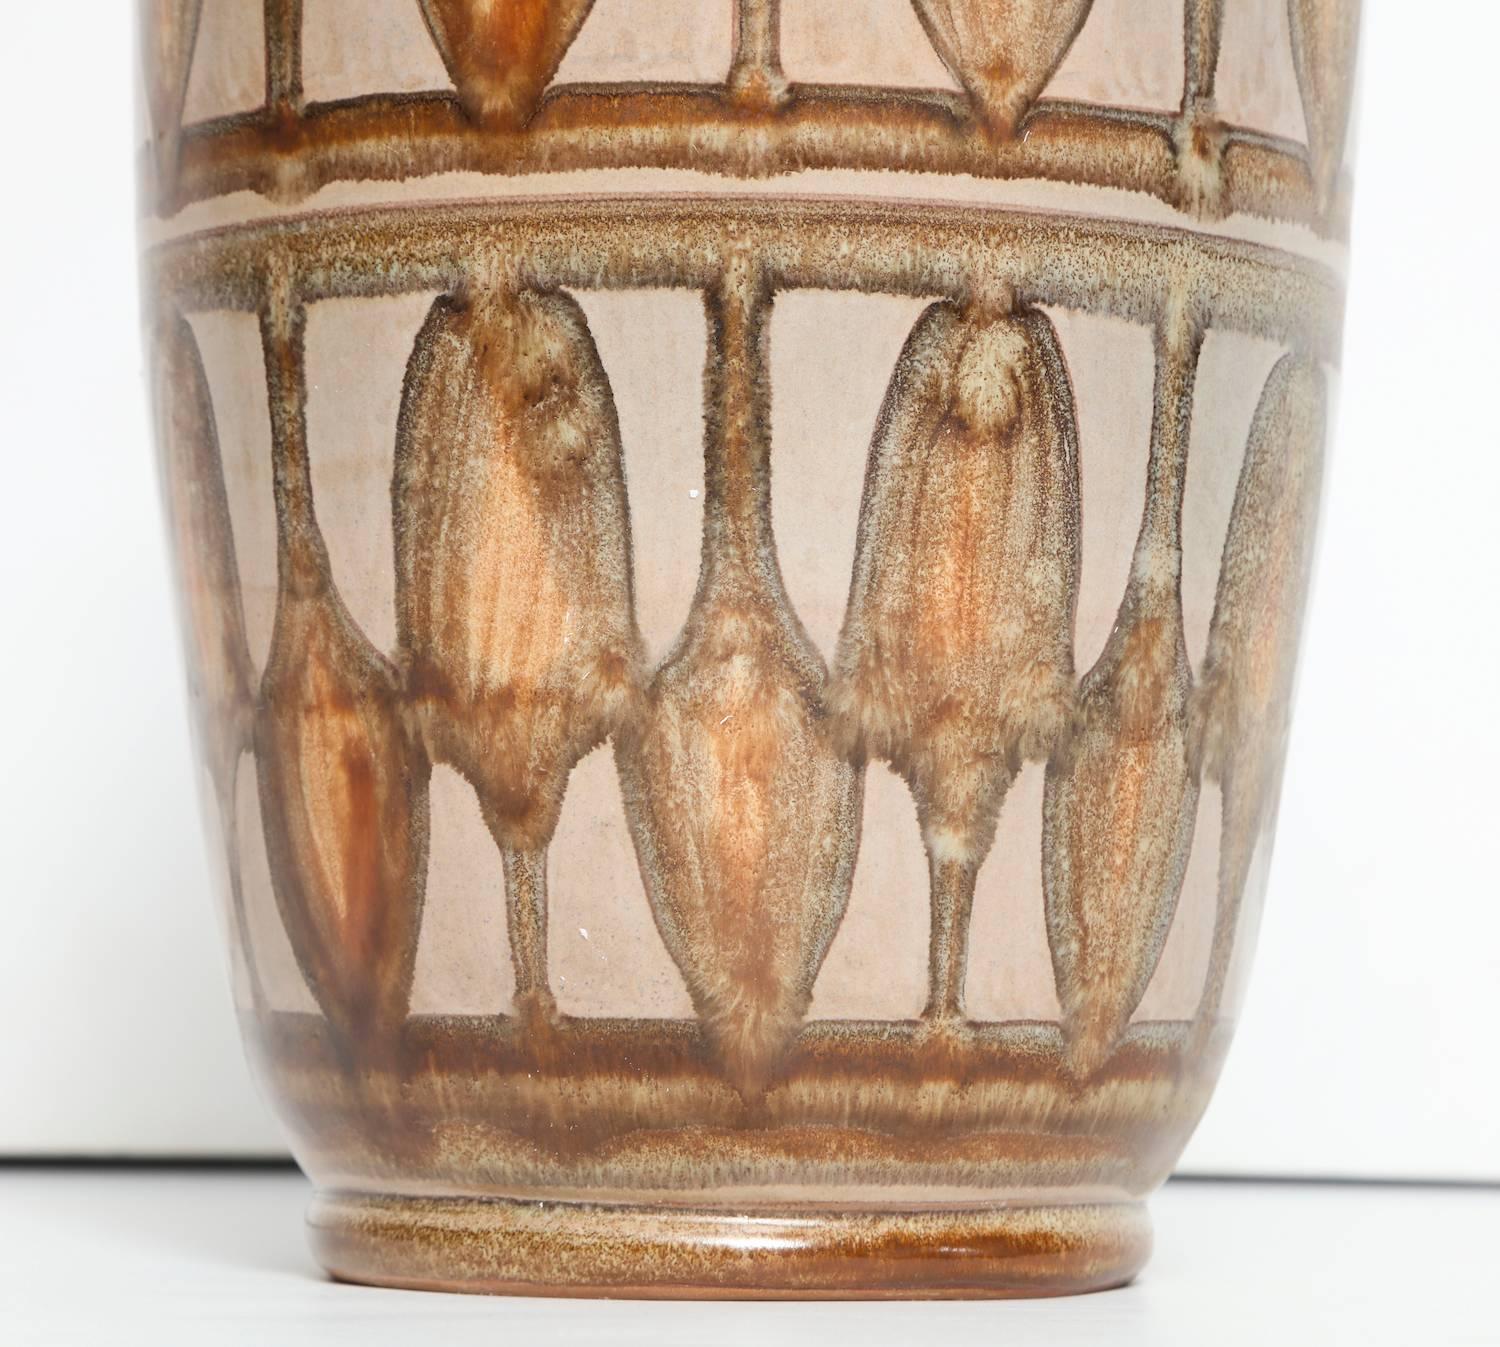 Slender vase with pinched neck and repeated pattern. Glazes in cream, rust and browns. Signed and dated on underside.